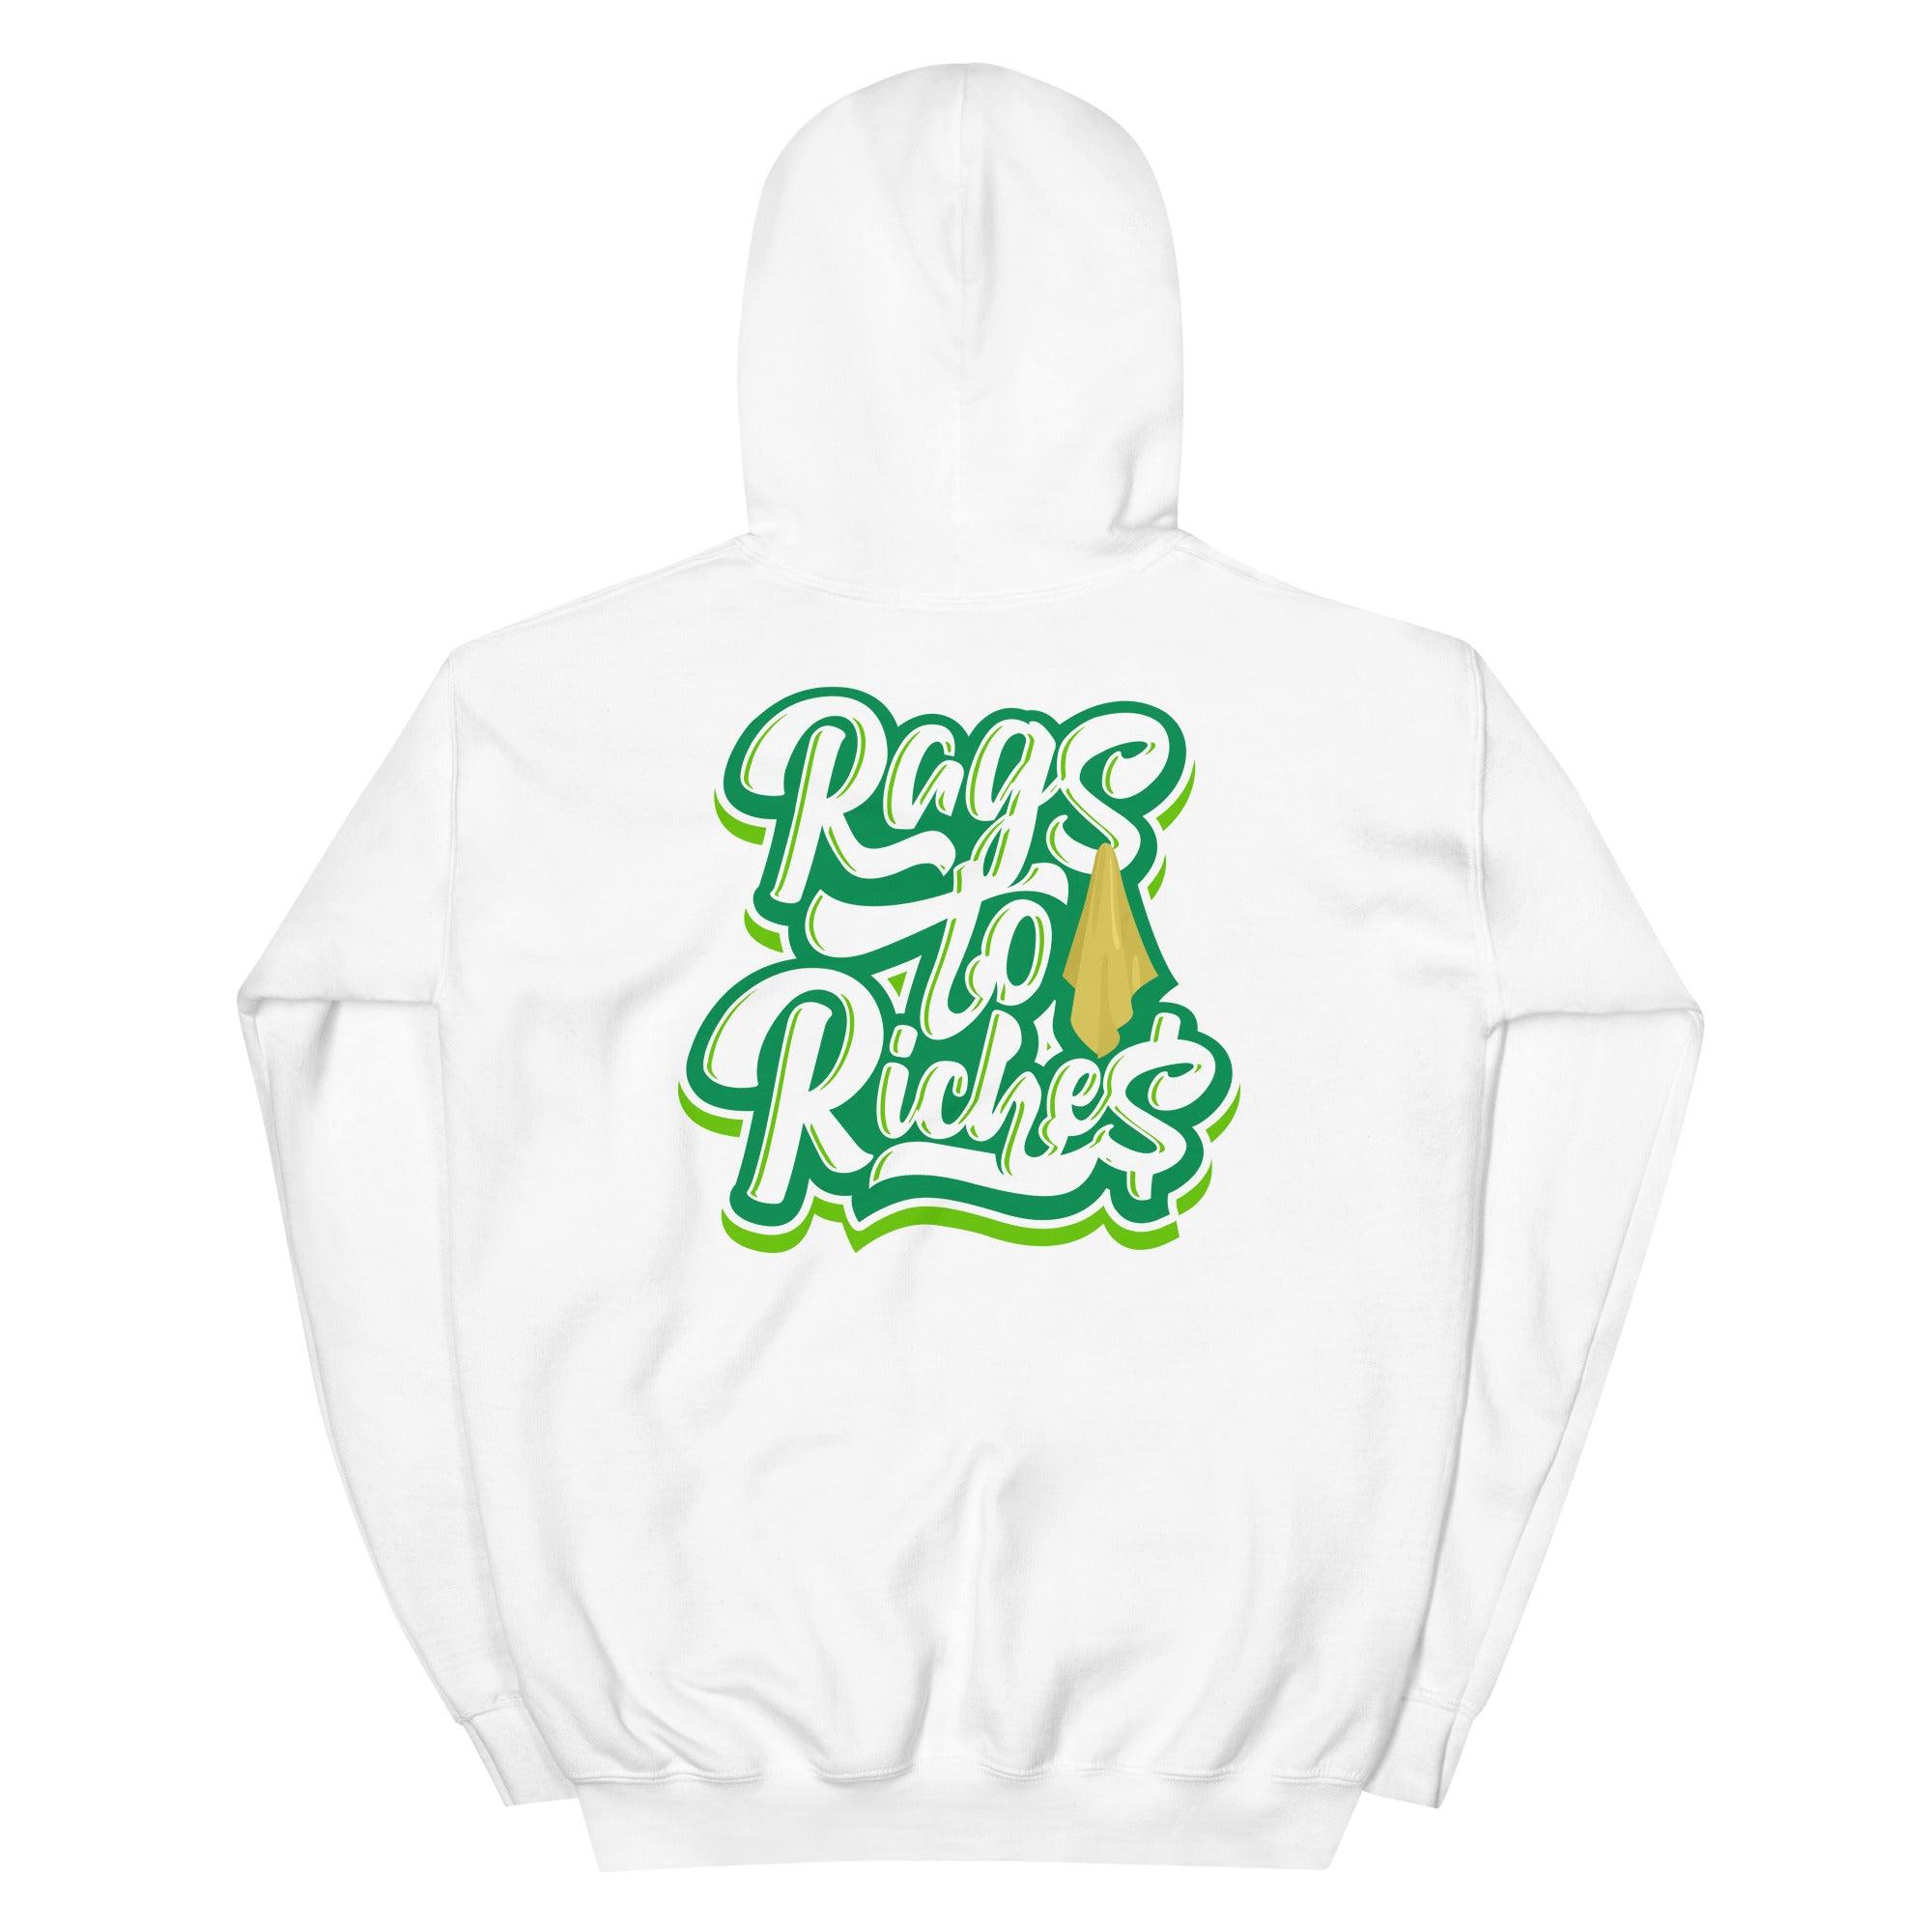 White Rags To Riches Hoodie Nike Air Max 90 St Patricks Day 2021 photo